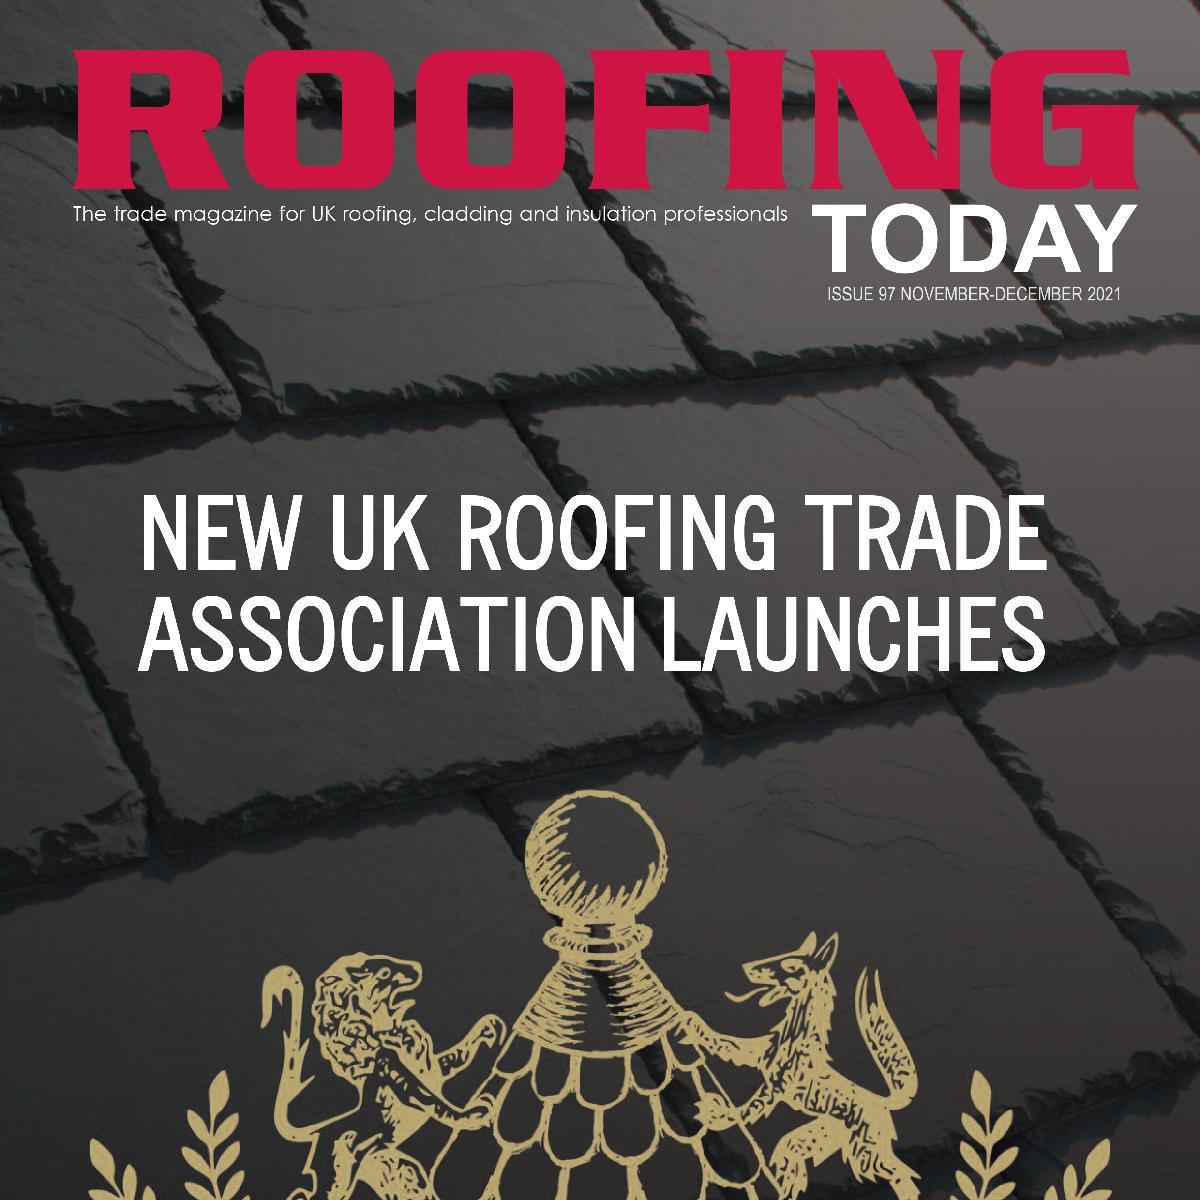 SDS Roofing Services LTD featured in "Roofing Today" magazine